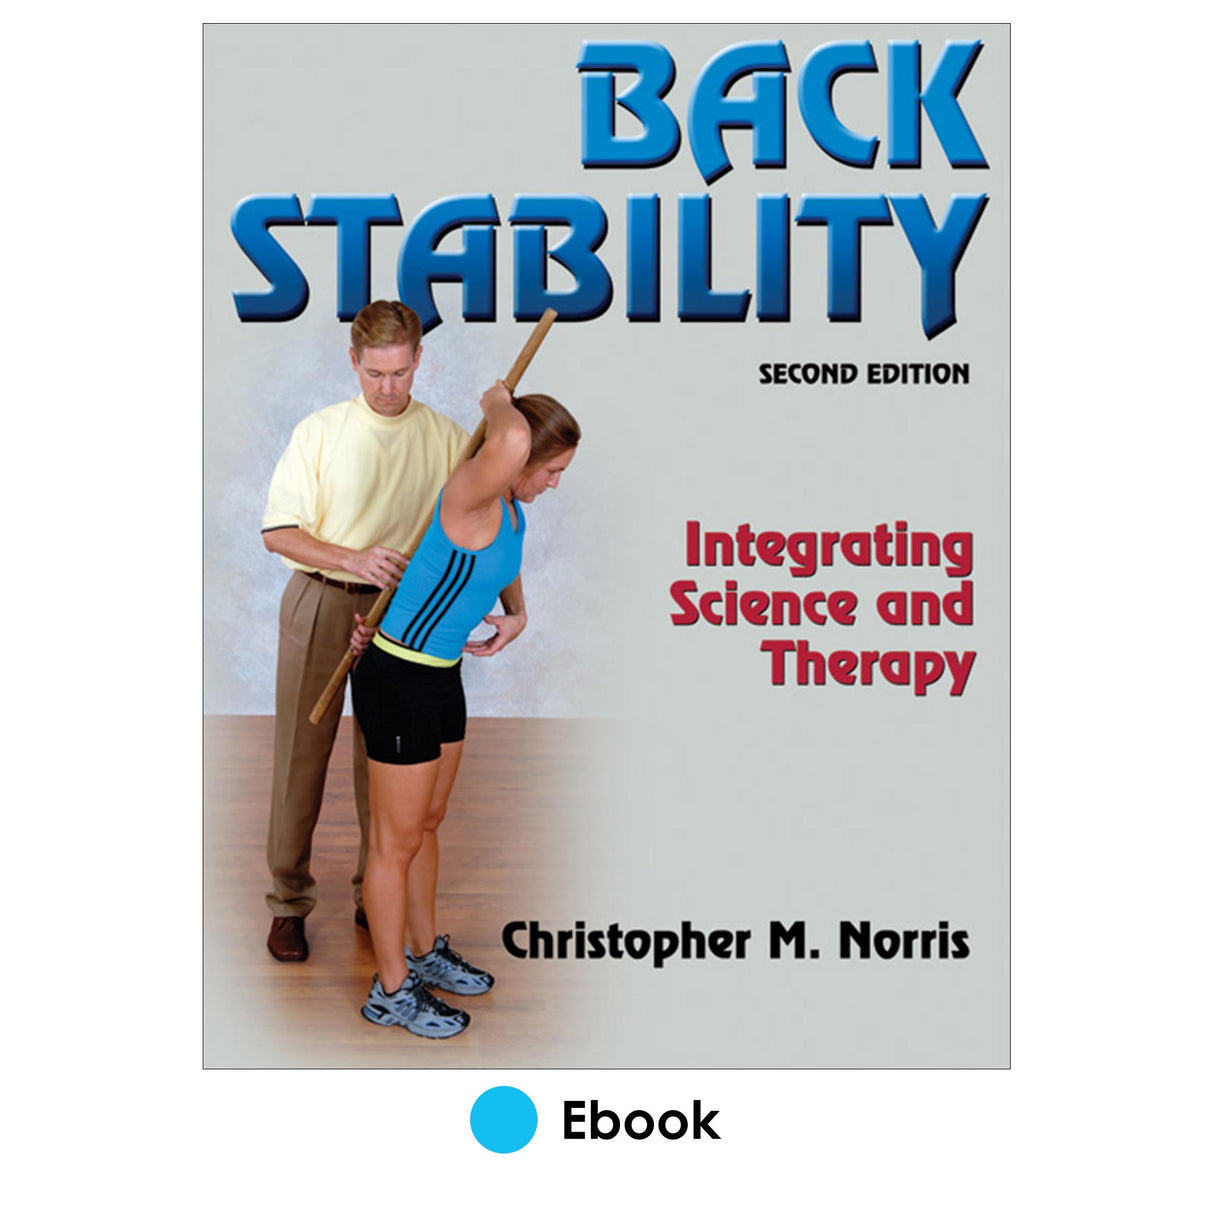 Back Stability 2nd Edition PDF